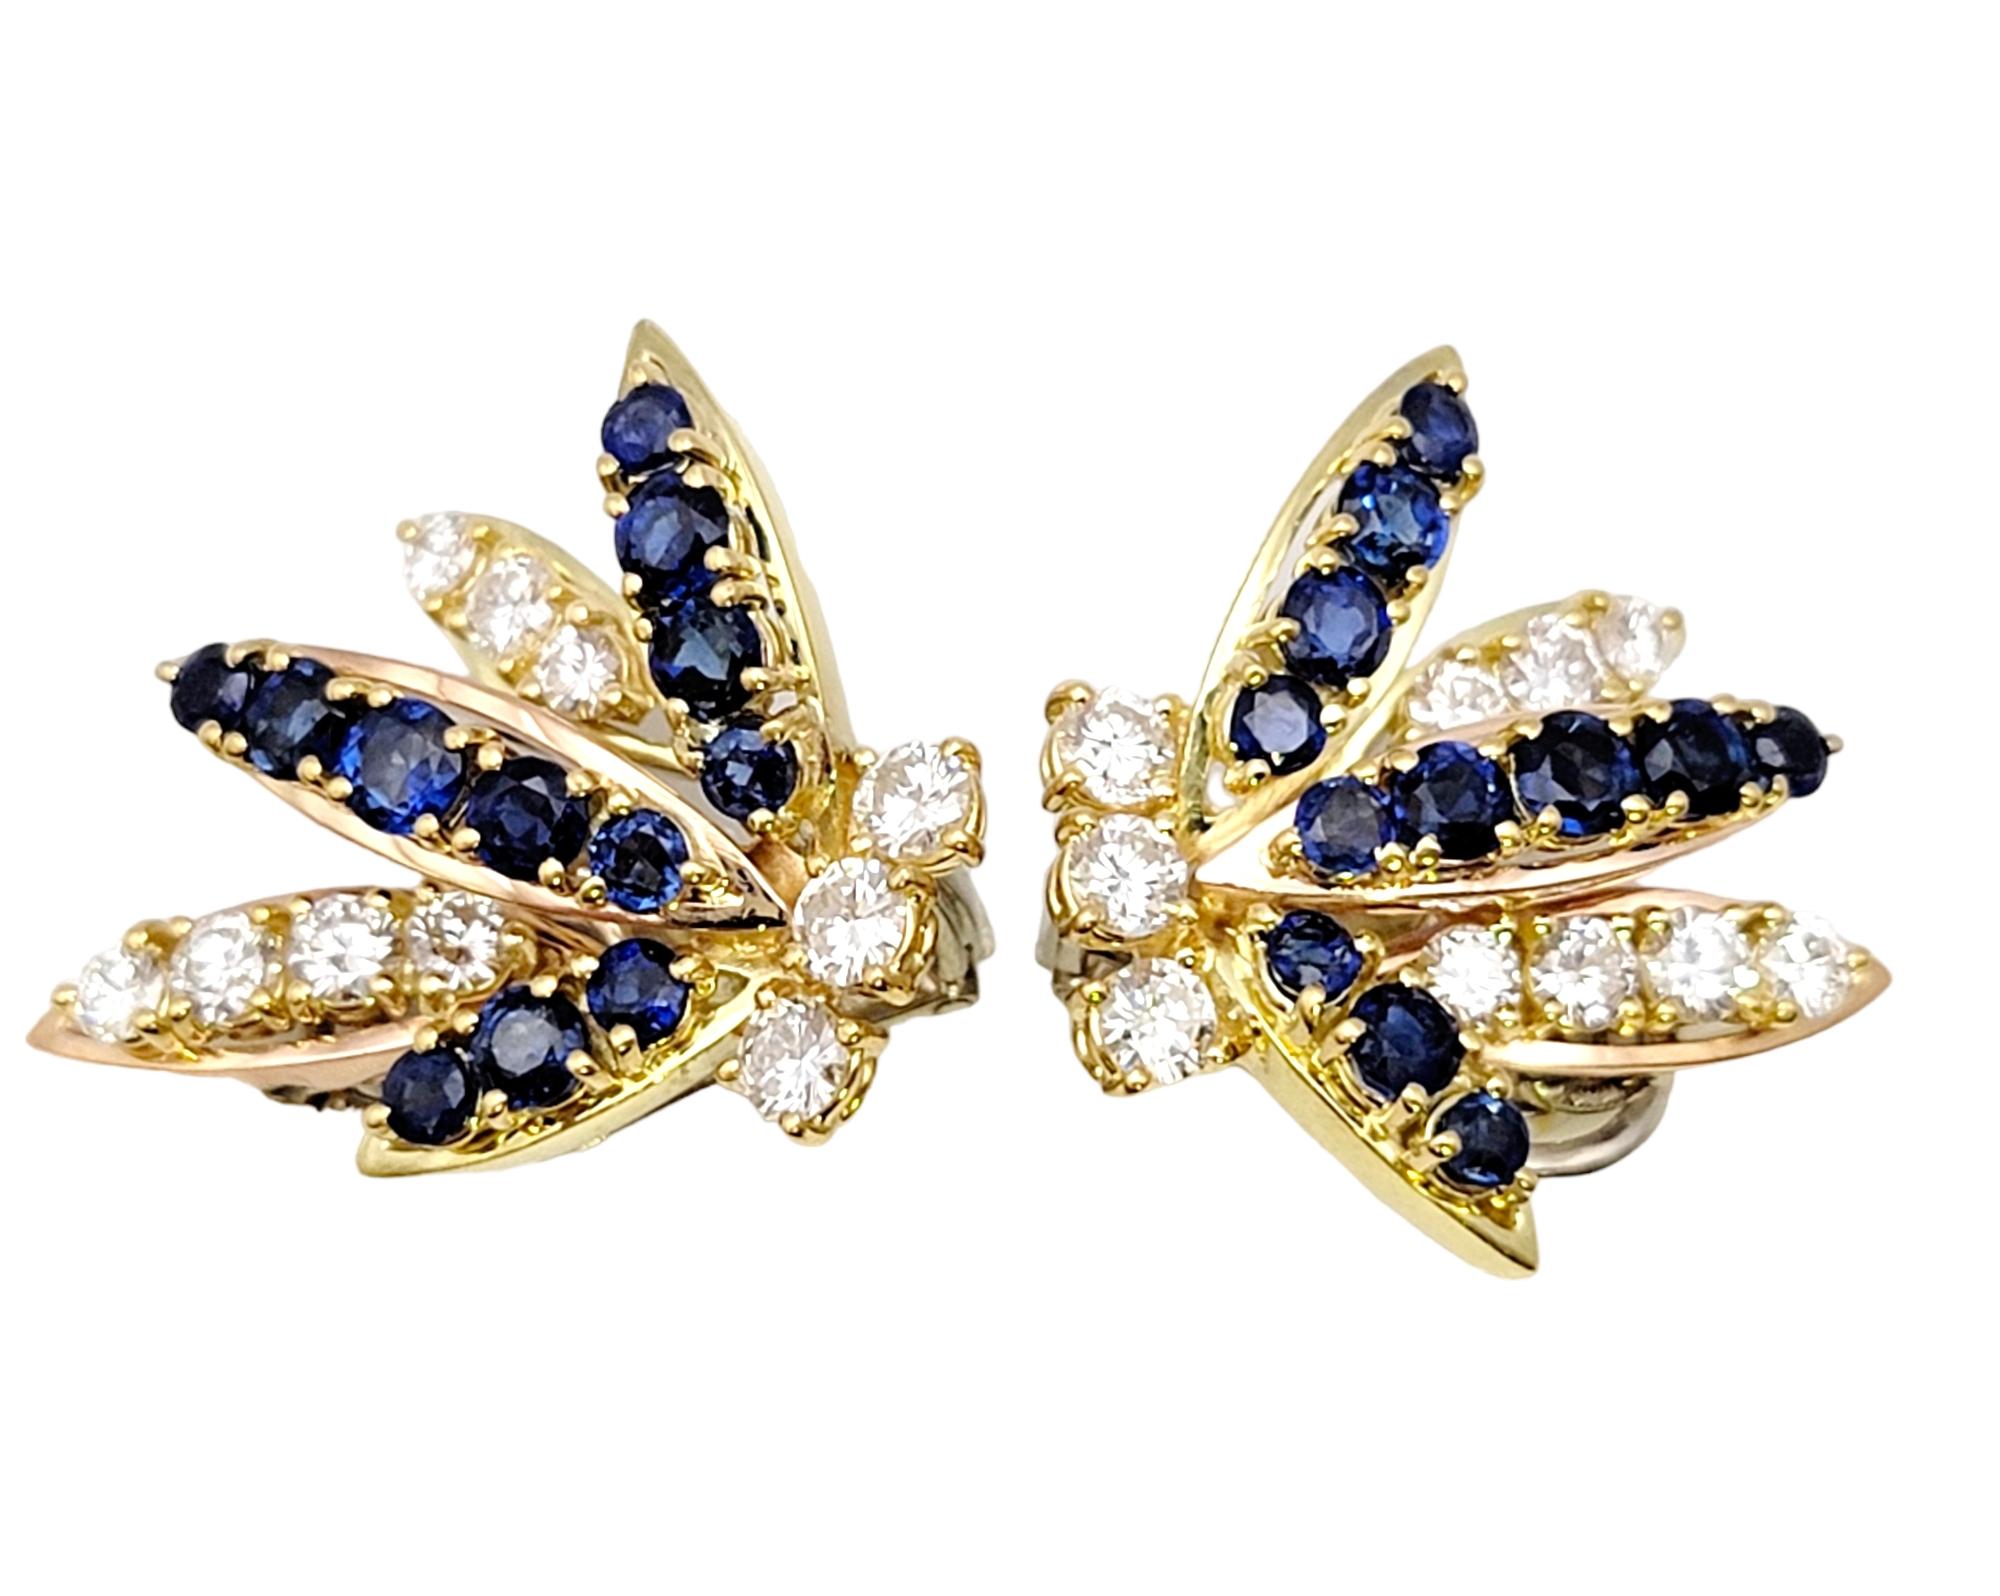 Absolutely breathtaking diamond and sapphire earrings. This exquisite pair features icy white diamonds and bright blue sapphires bursting off the lobe in a stunning spray design. The light reflects magnificently off the gemstones, making them